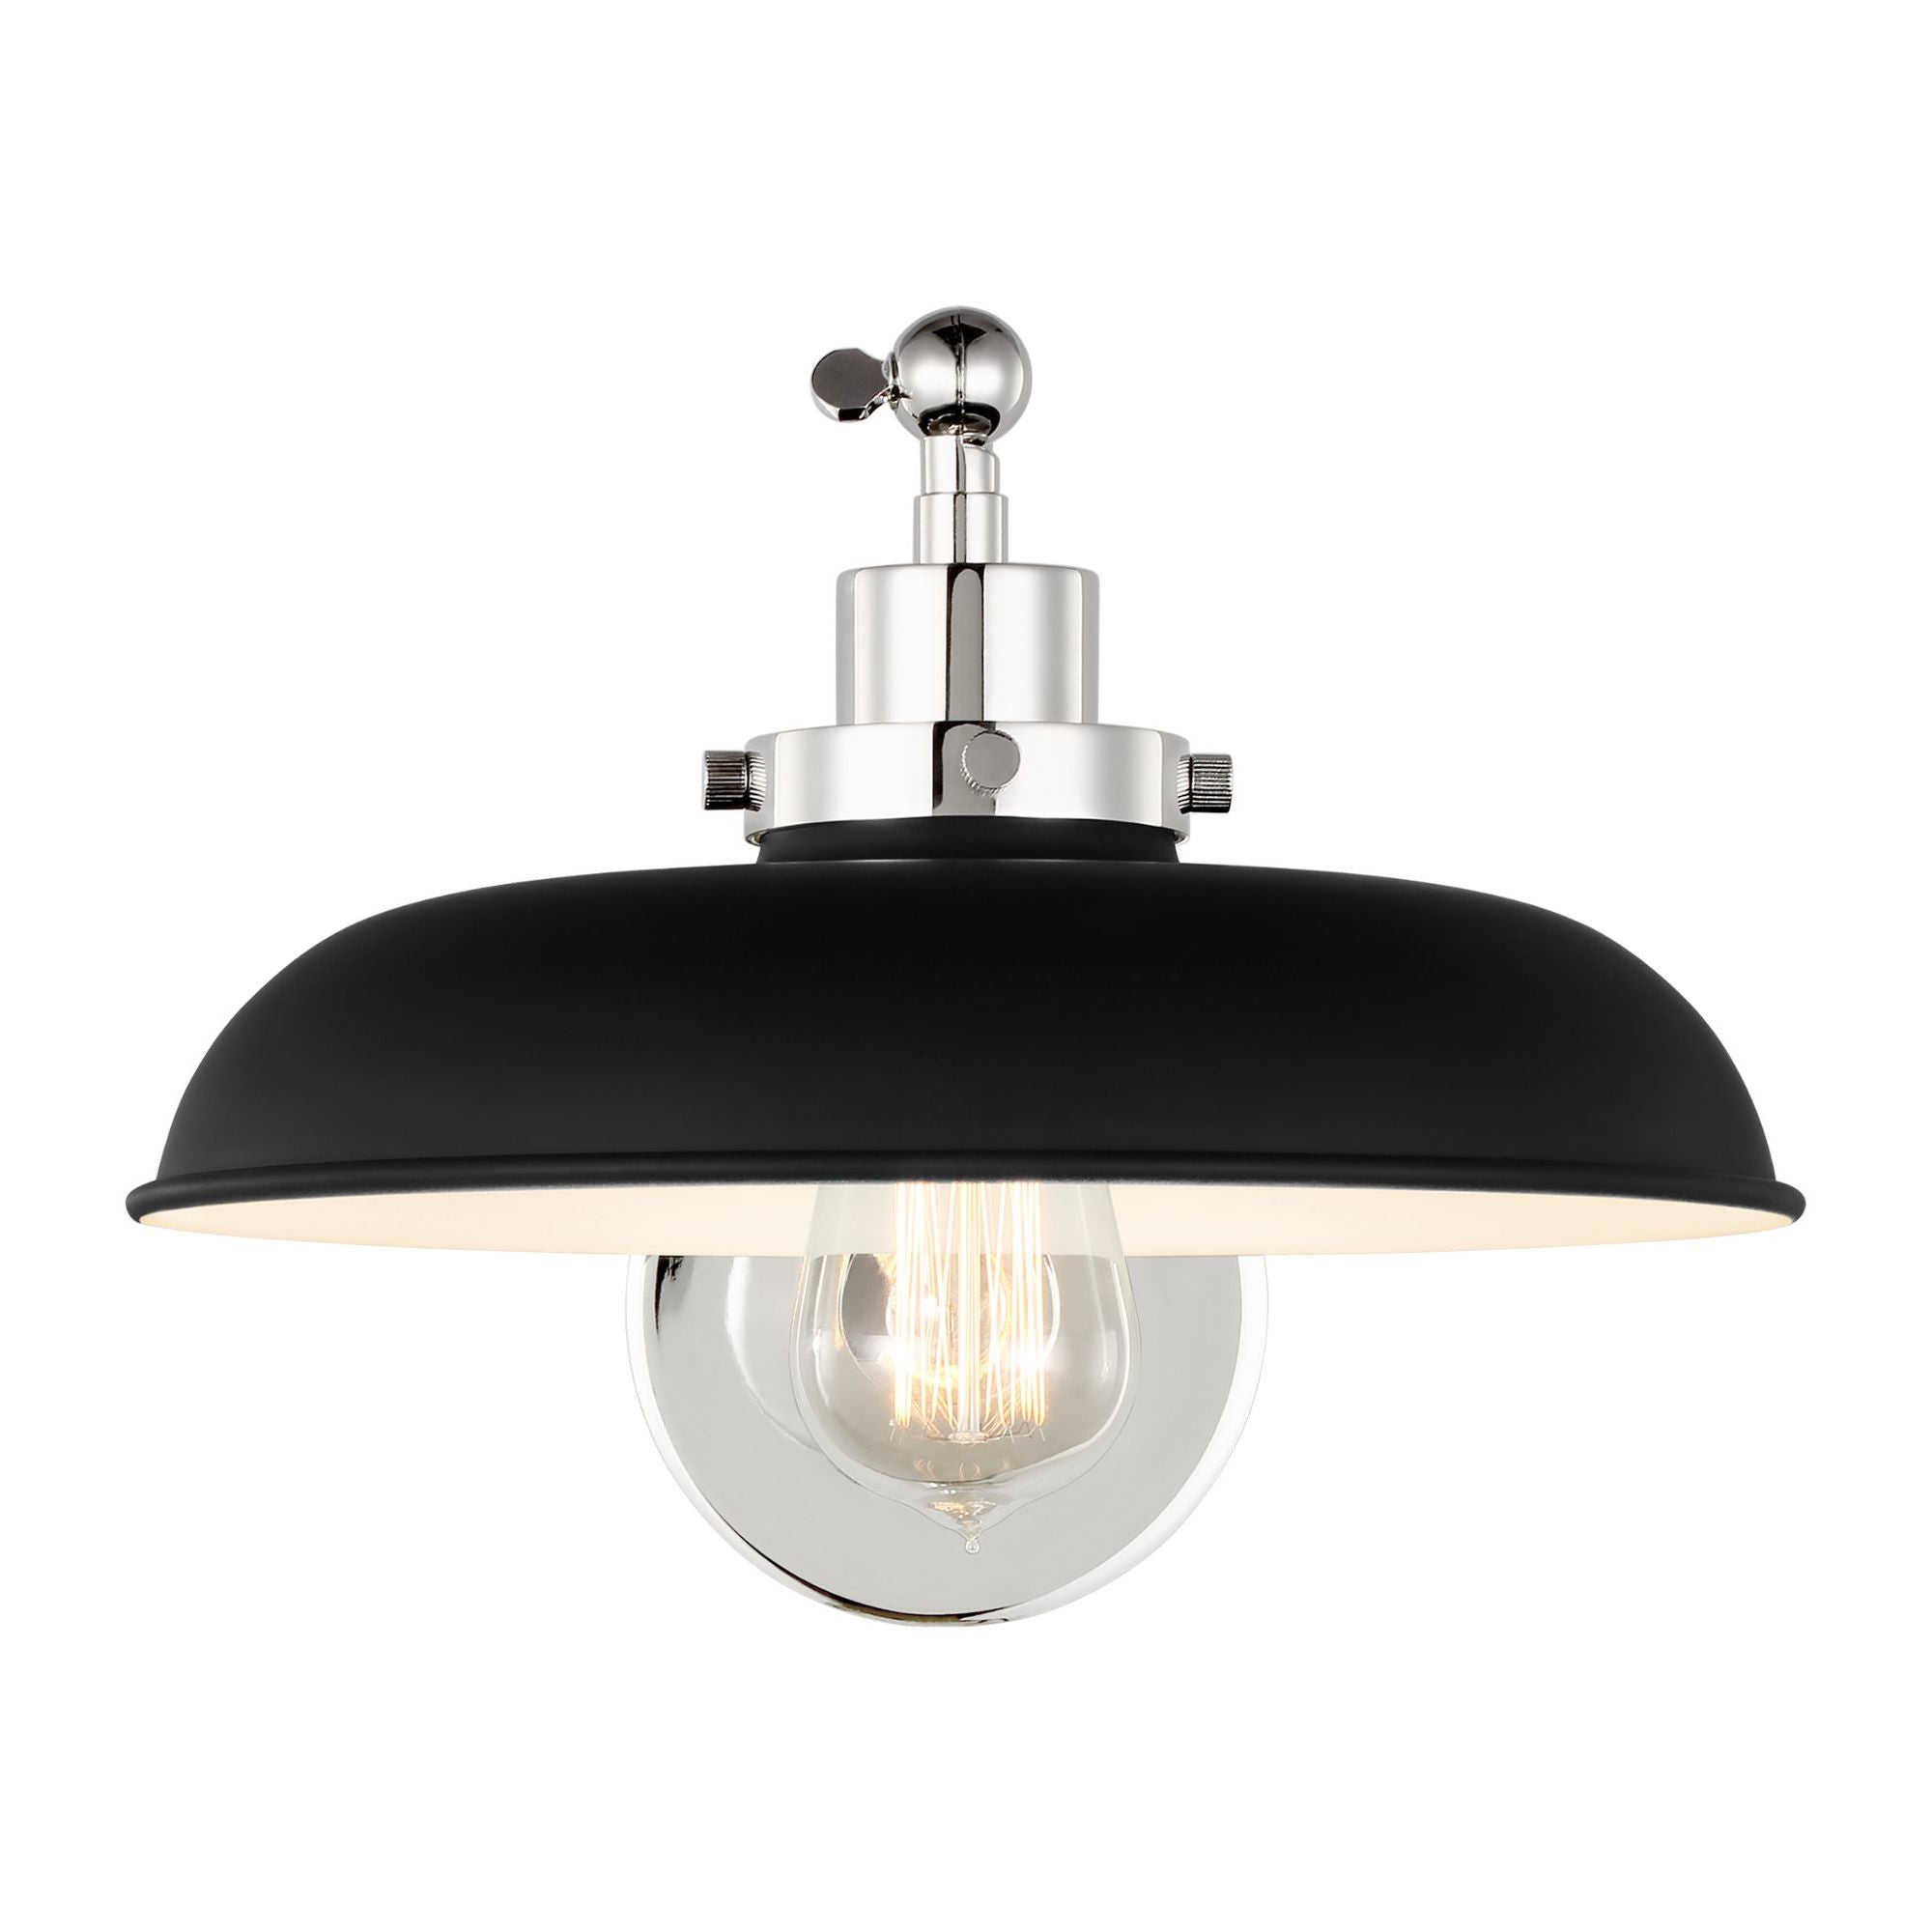 Chapman & Myers Wellfleet Single Arm Wide Task Sconce in Midnight Black and Polished Nickel